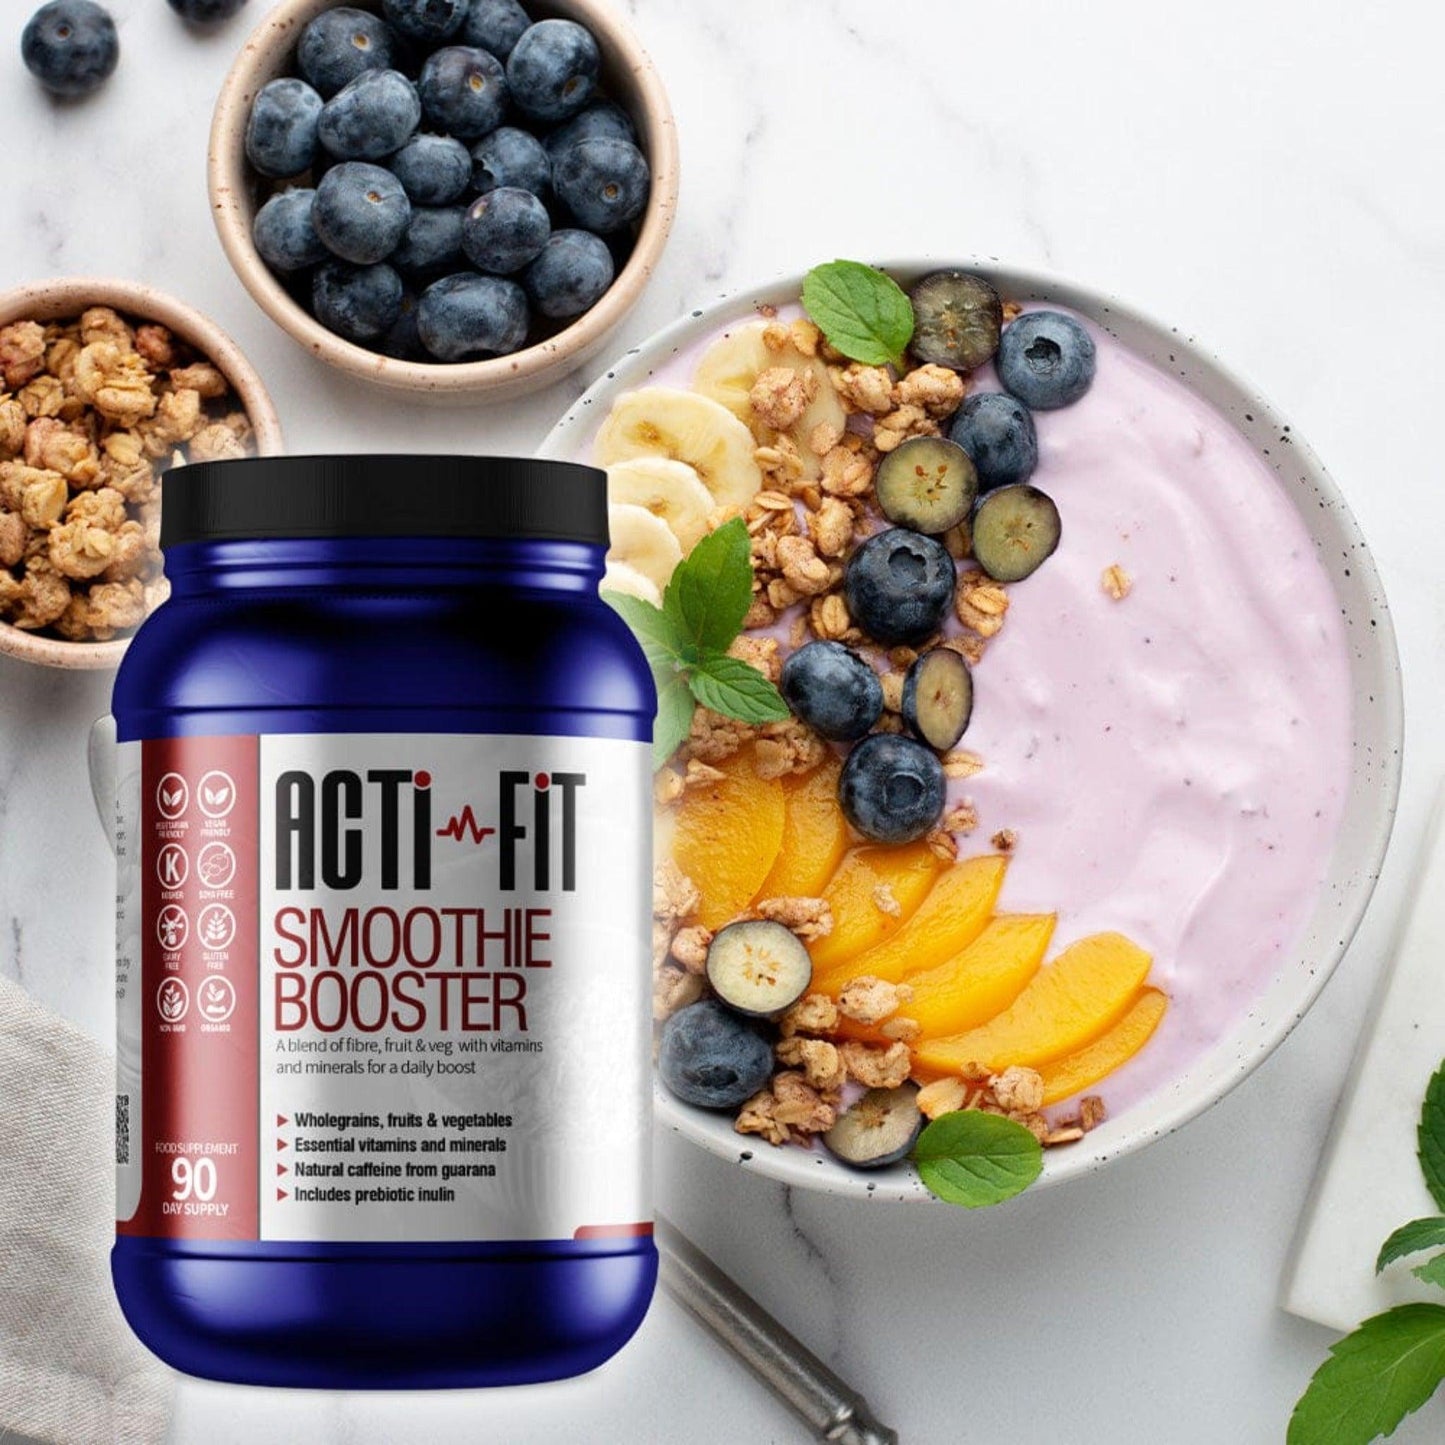 Blue container of Acti-Fit Smoothie Booster supplement, providing a blend of wholegrains, fruits, vegetables, vitamins, minerals, and prebiotic inulin, 30-day supply.